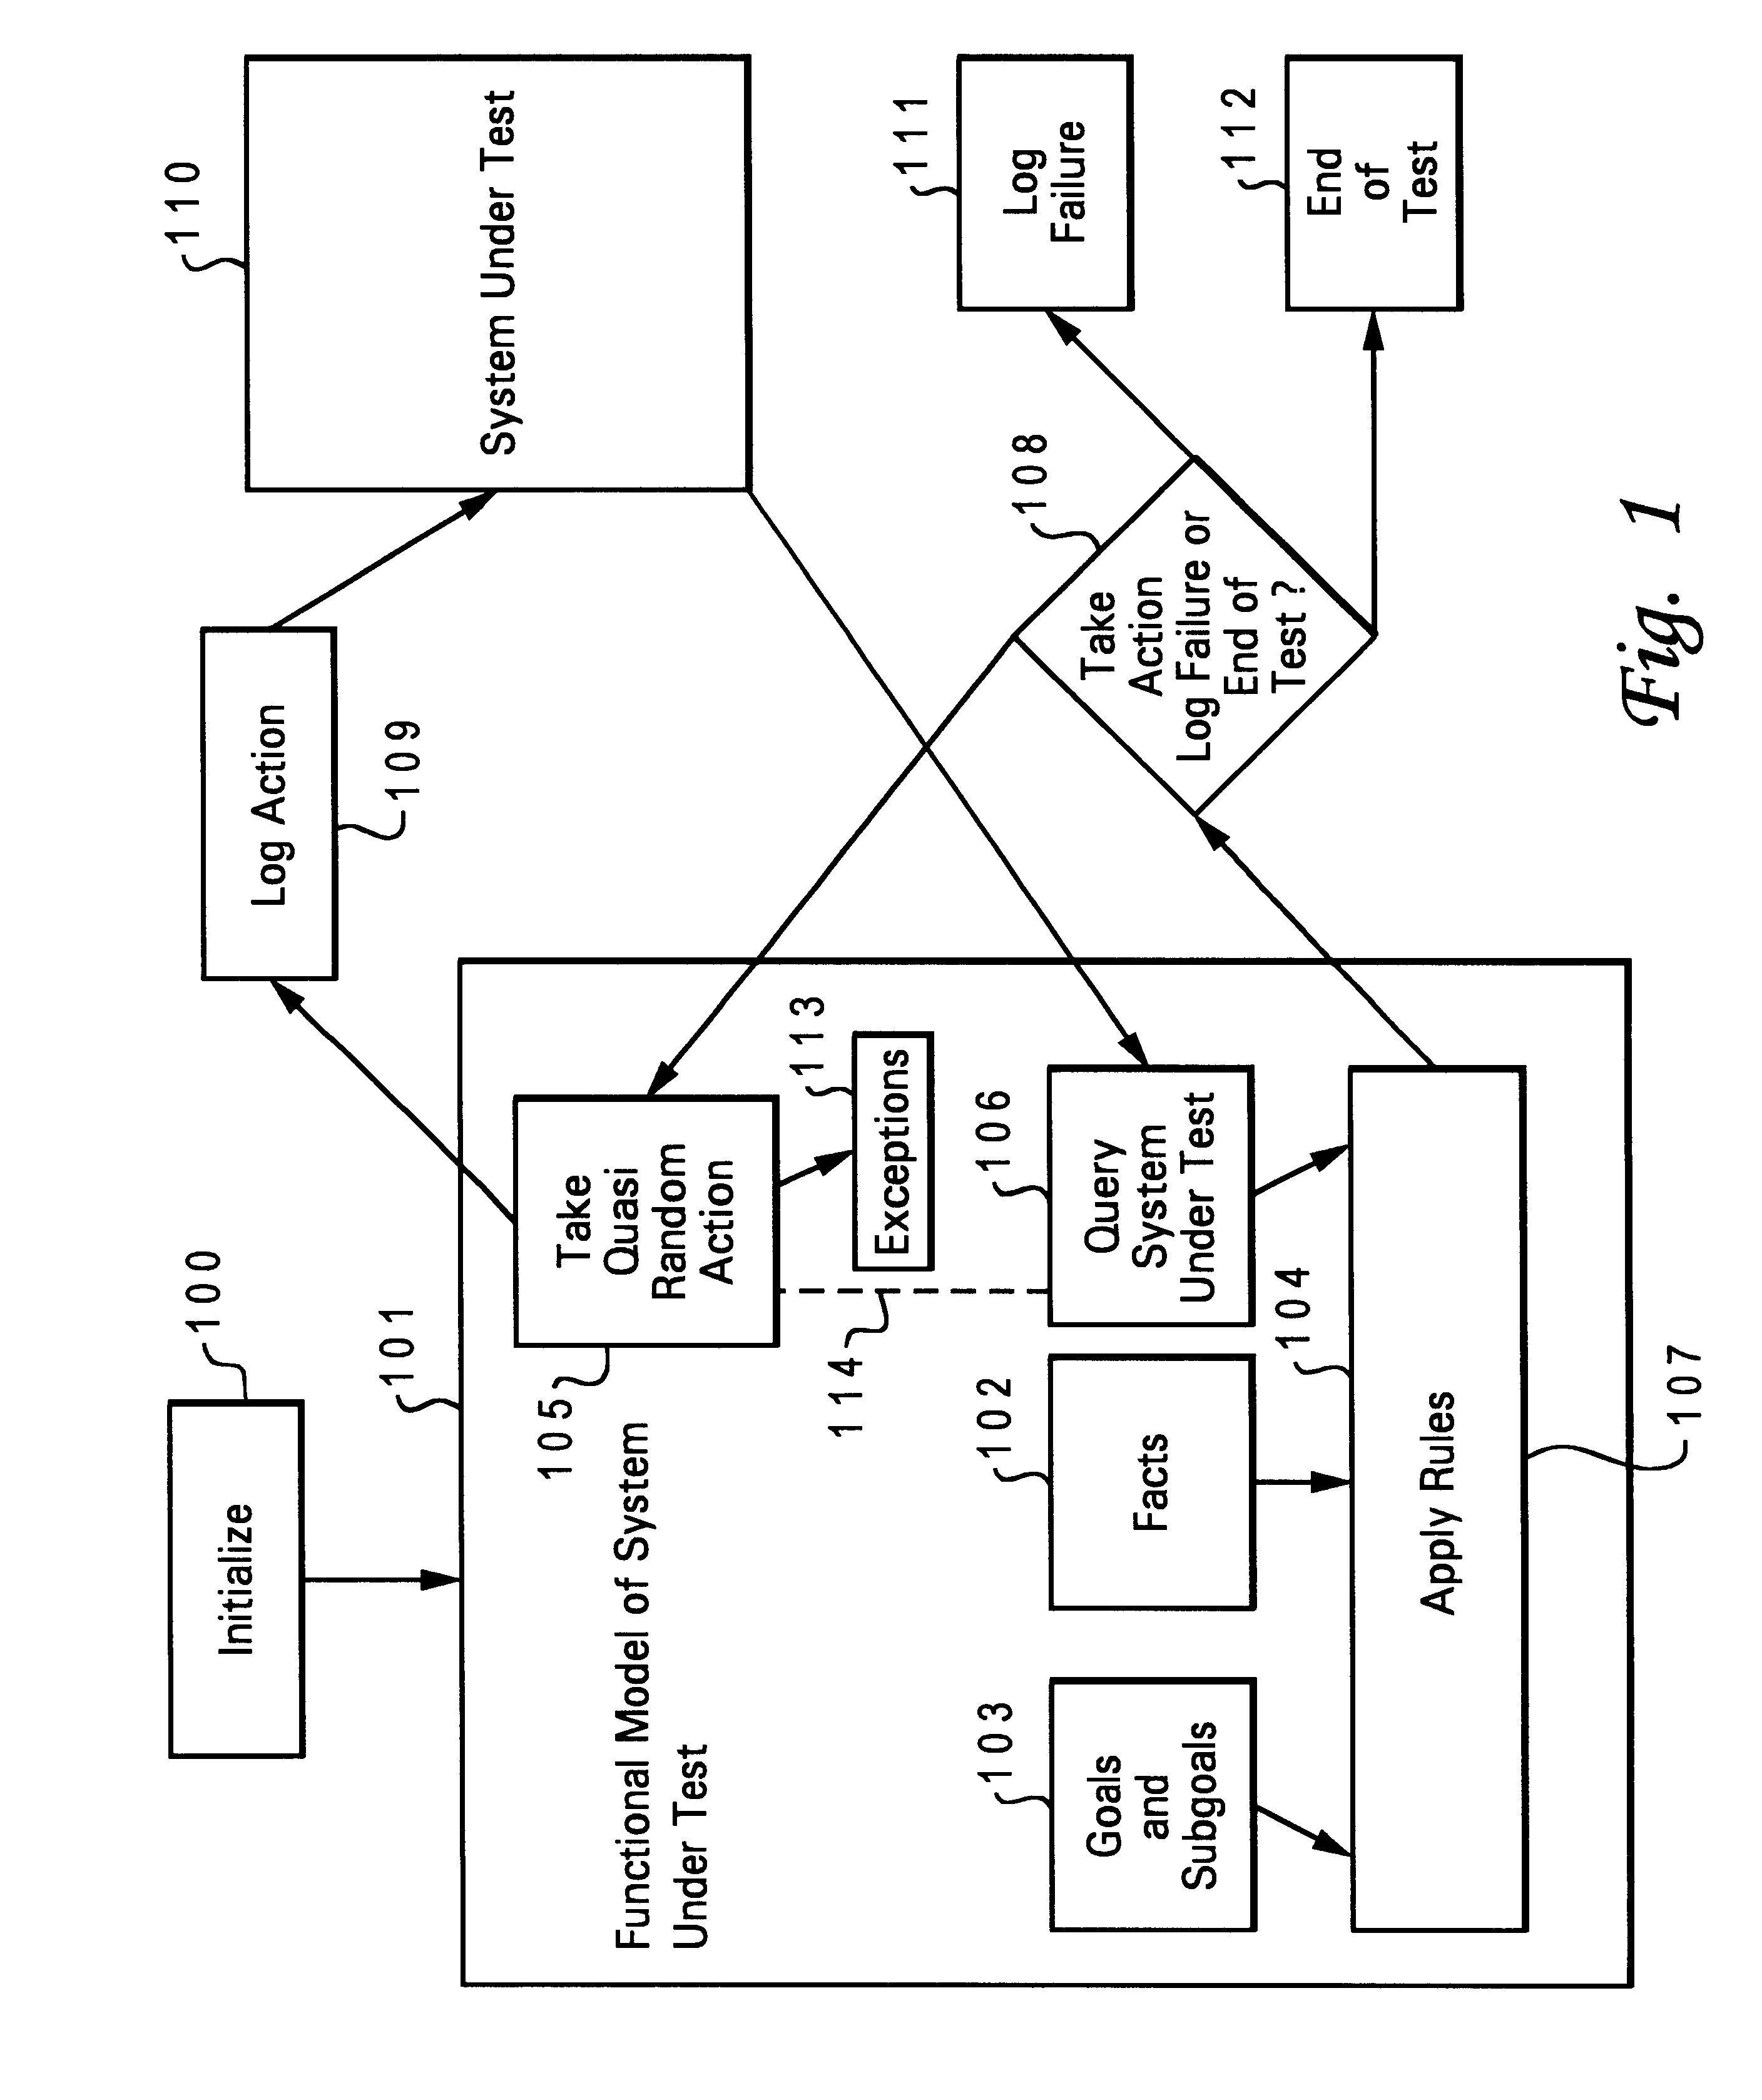 Method and apparatus for training an automated software test